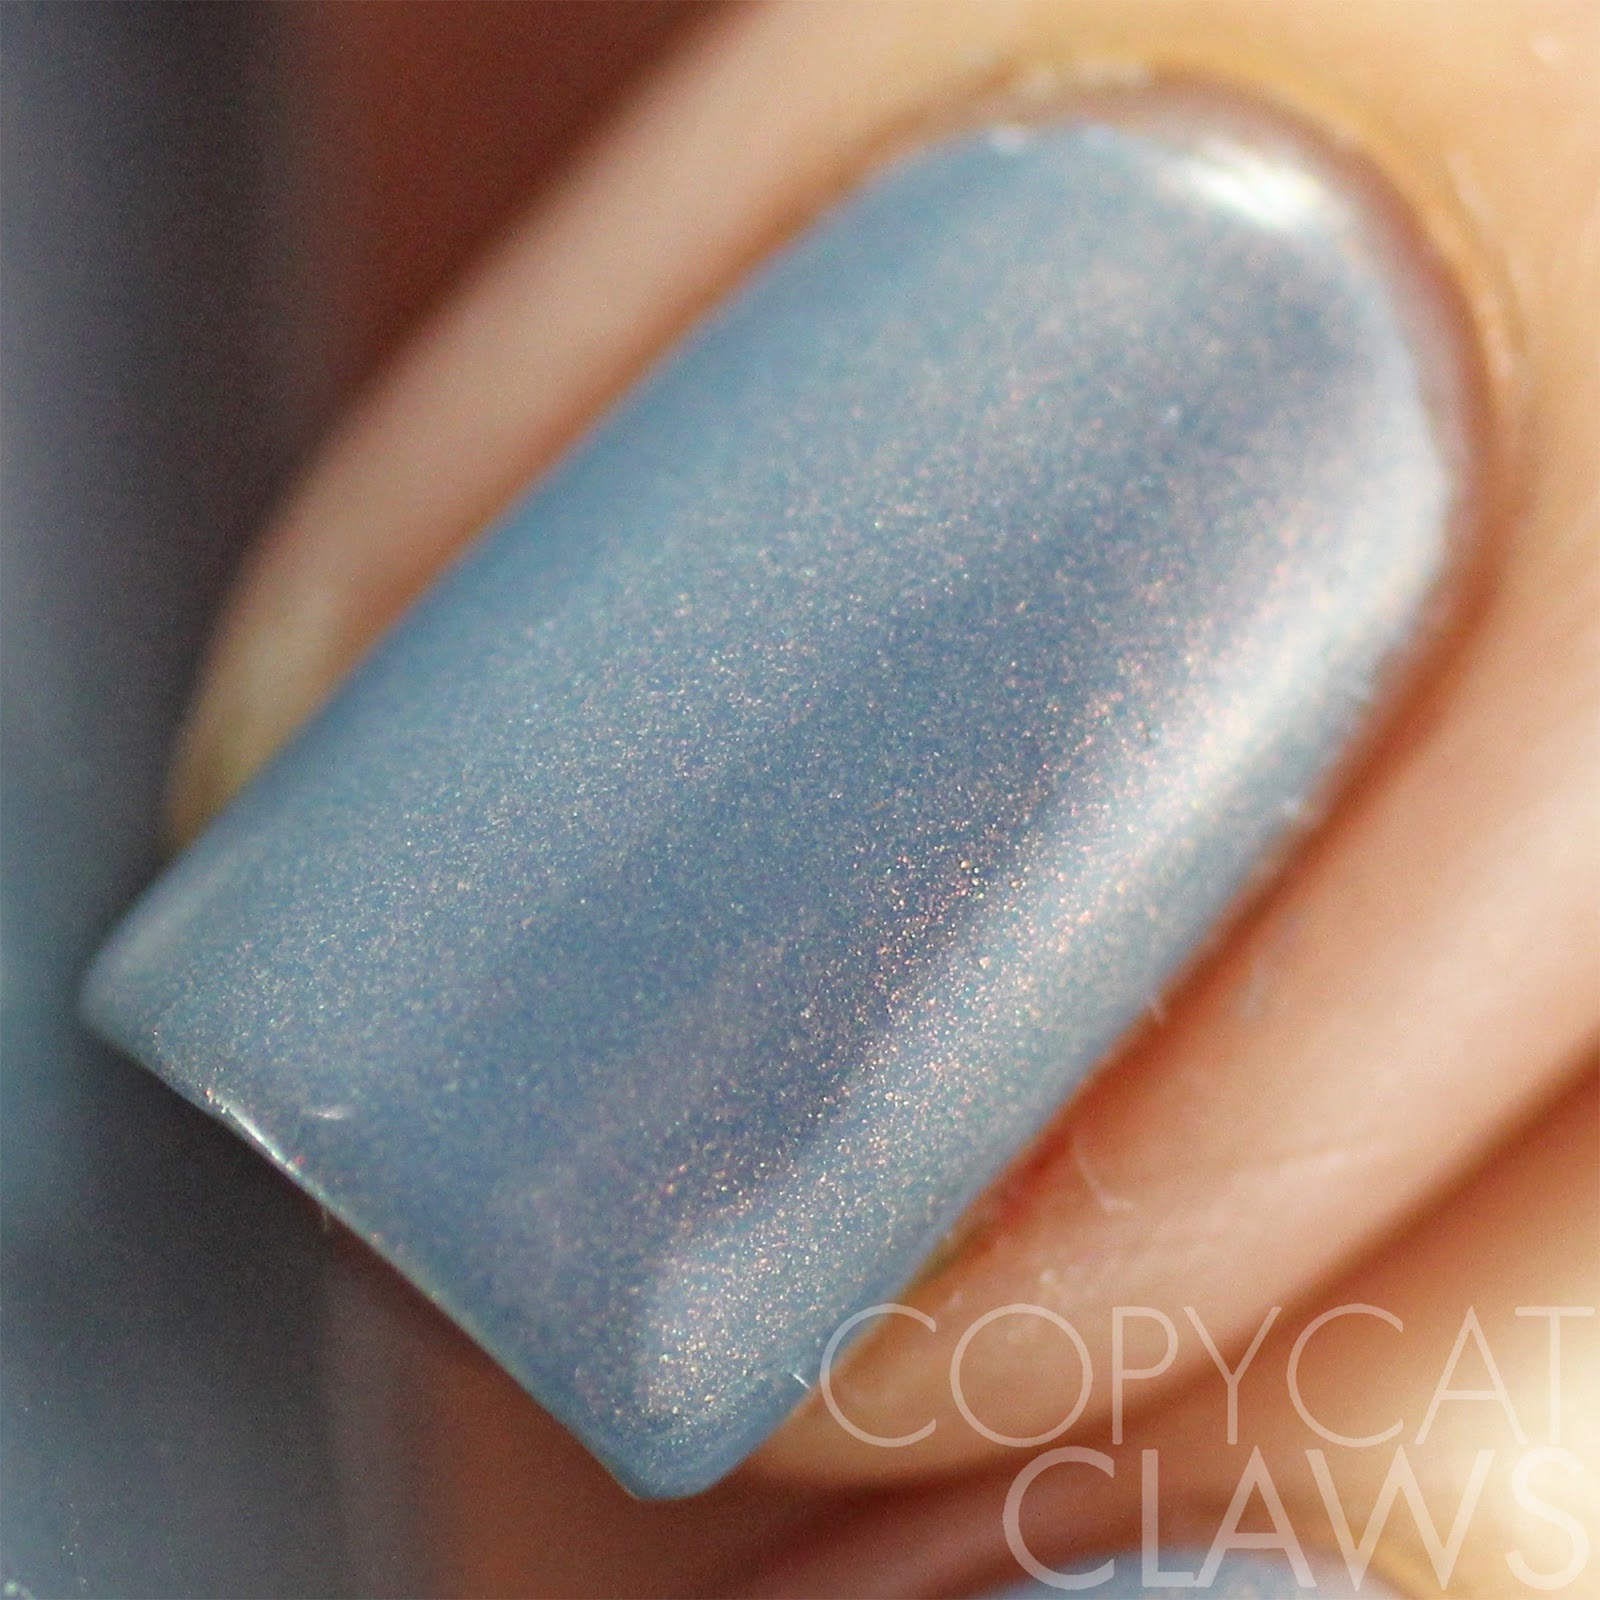 Copycat Claws: Illyrian Polish Eerie Woodlands Part 3 and Color4Nails ...